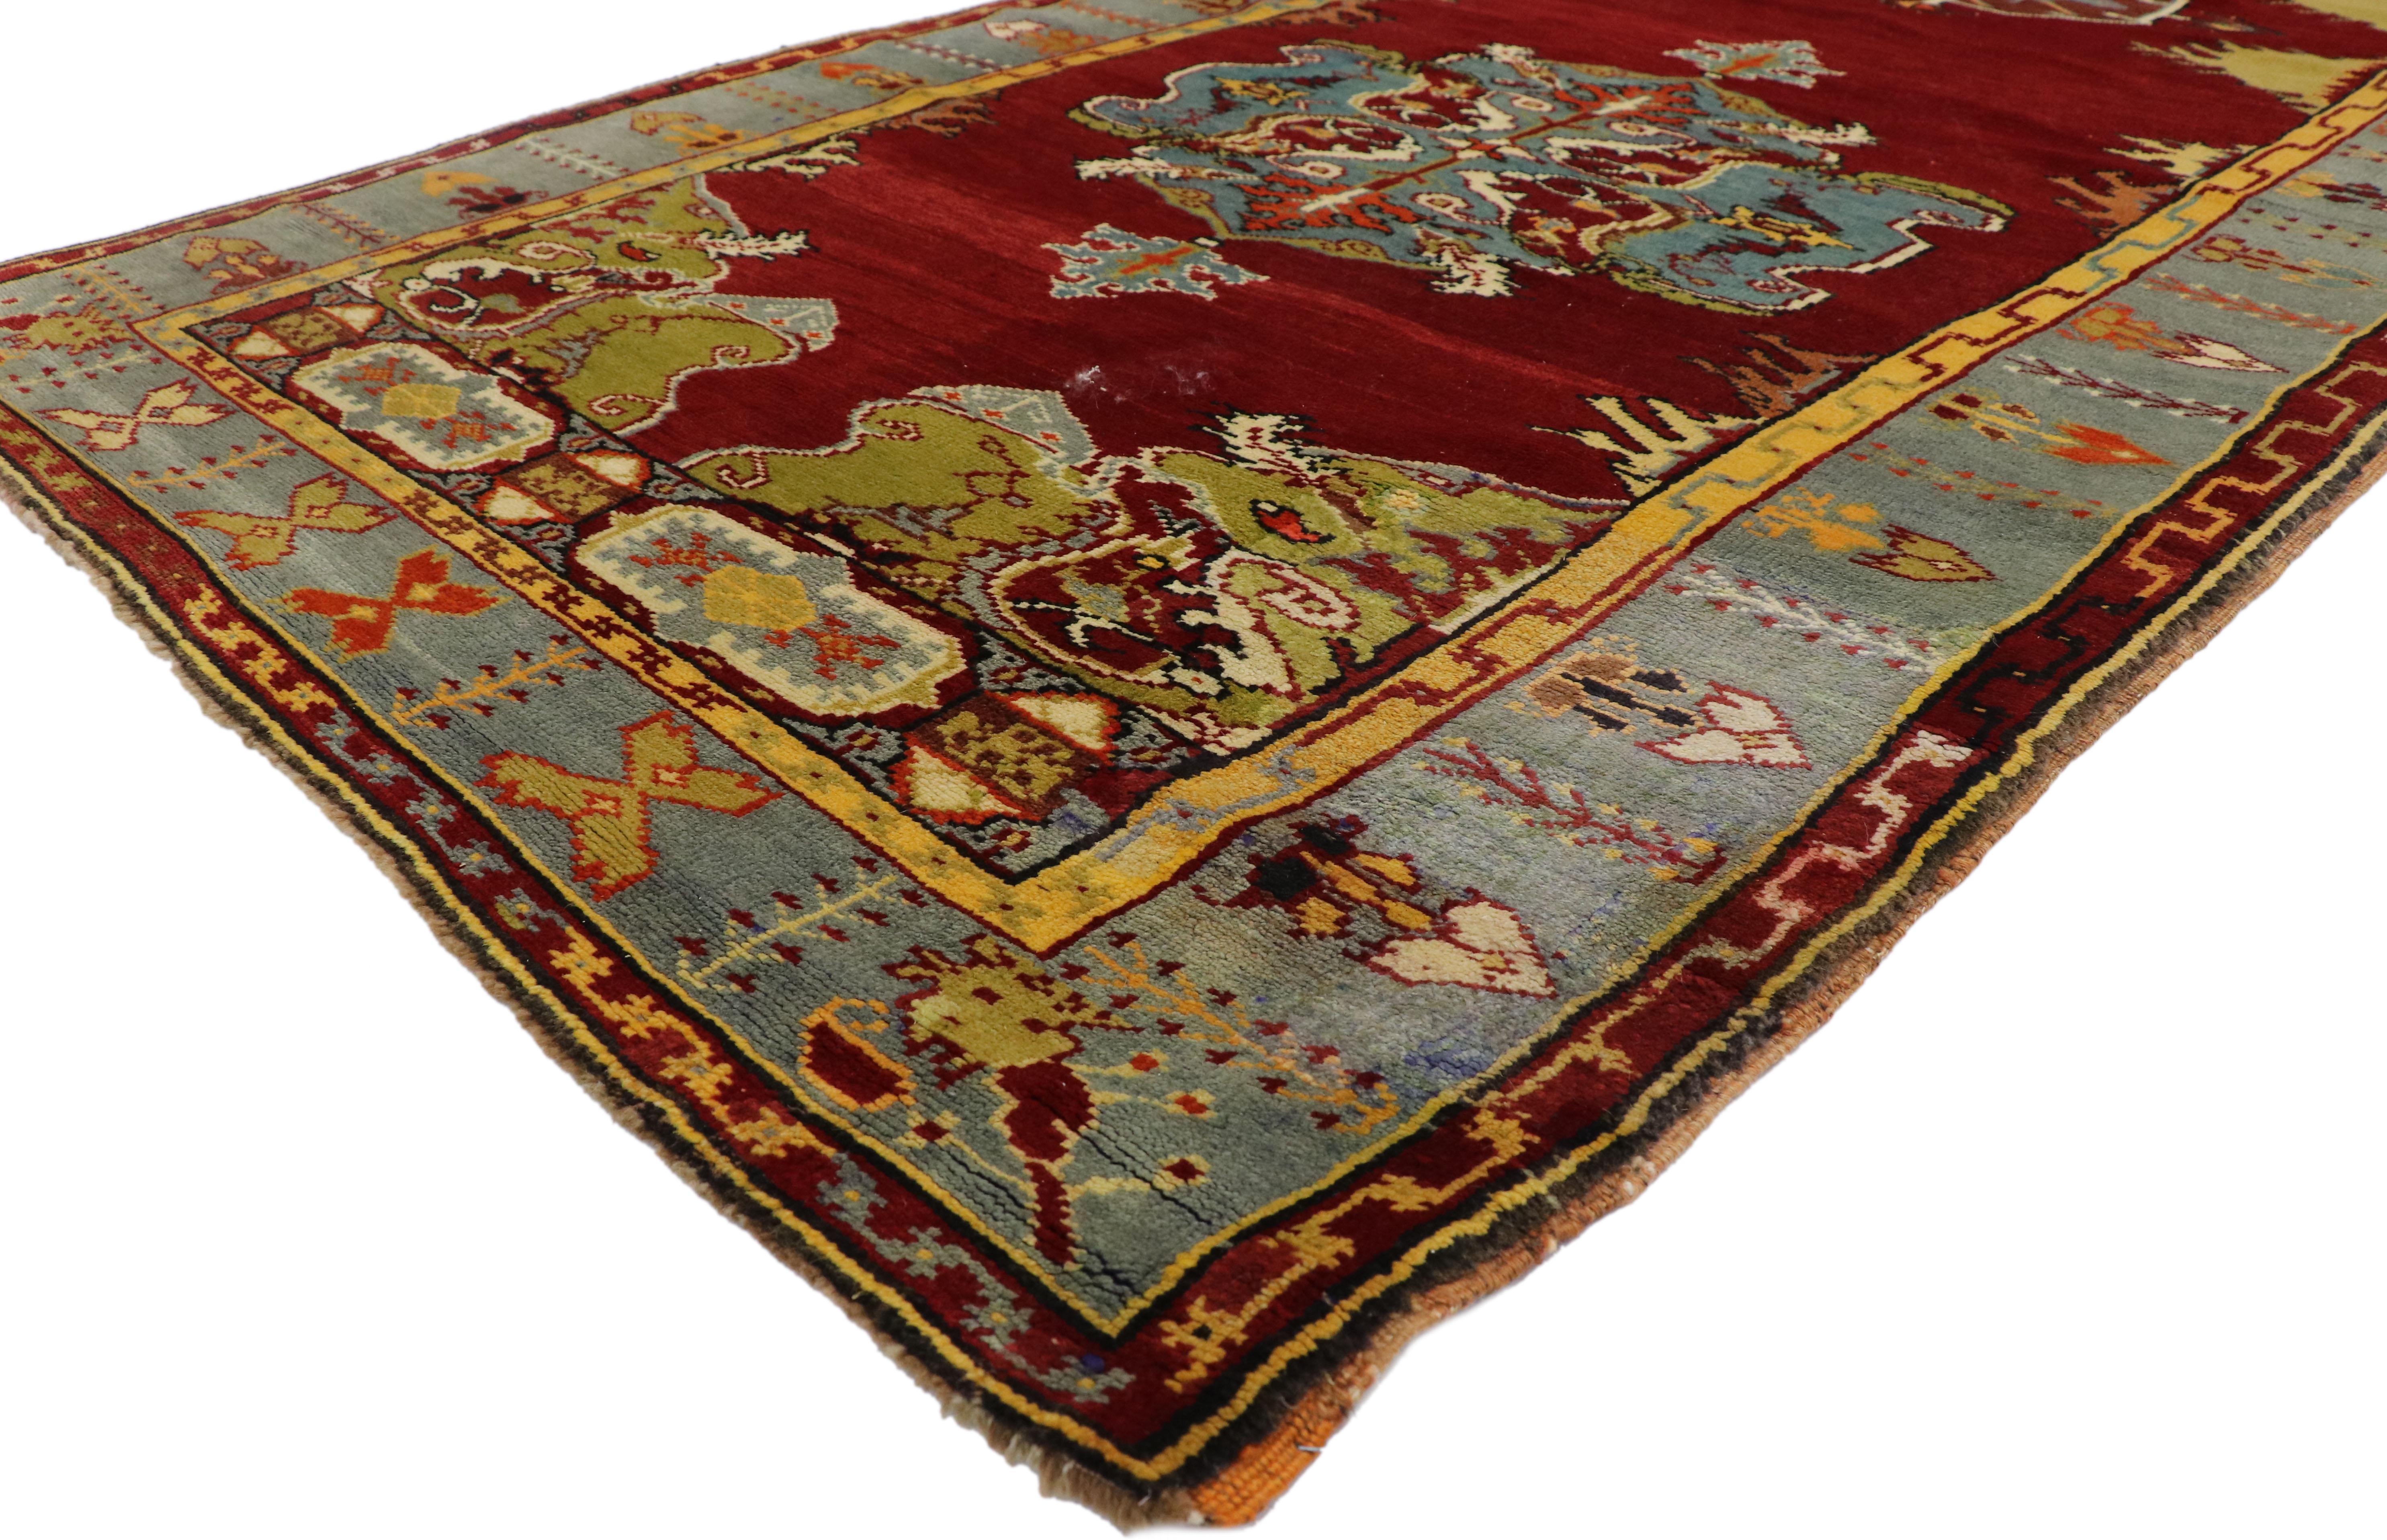 50587 Vintage Turkish Oushak Runner with Mid-Century Modern Style 04'02 x 12'00. With its rich detailing and vibrant colors, this hand-knotted wool vintage Turkish Oushak runner is easily integrated into modern spaces, contemporary decor and even